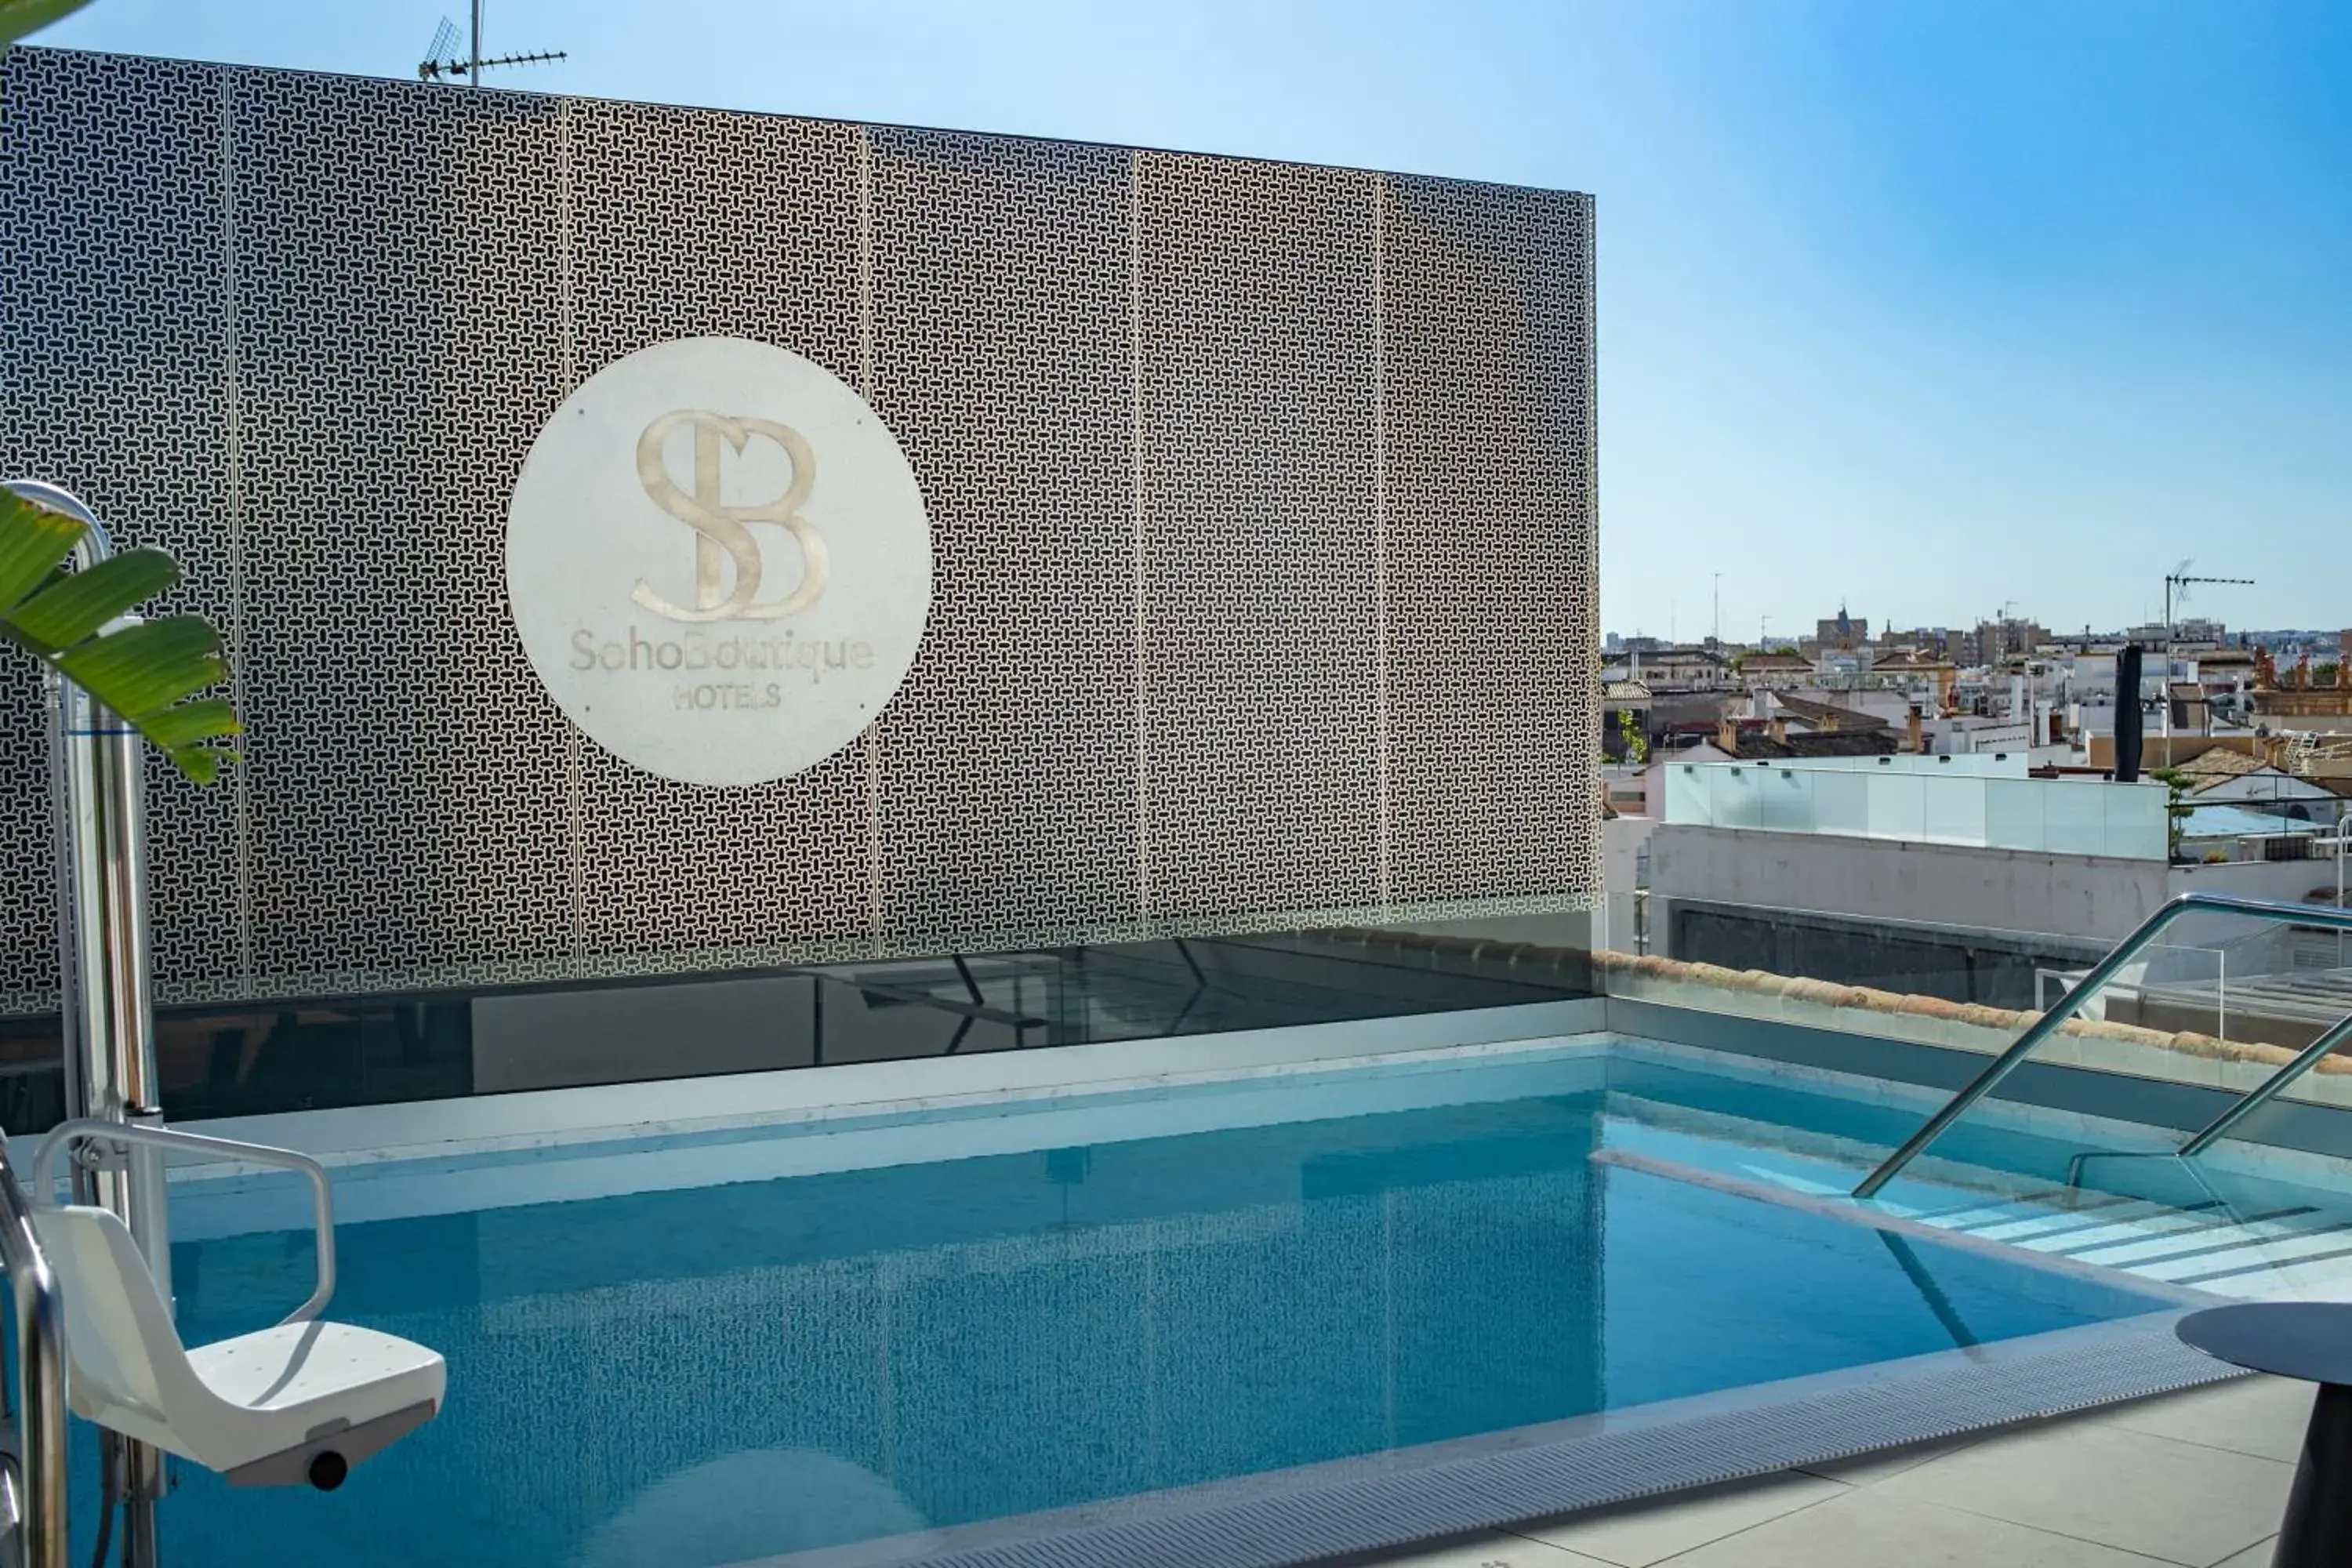 Swimming Pool in Soho Boutique Catedral